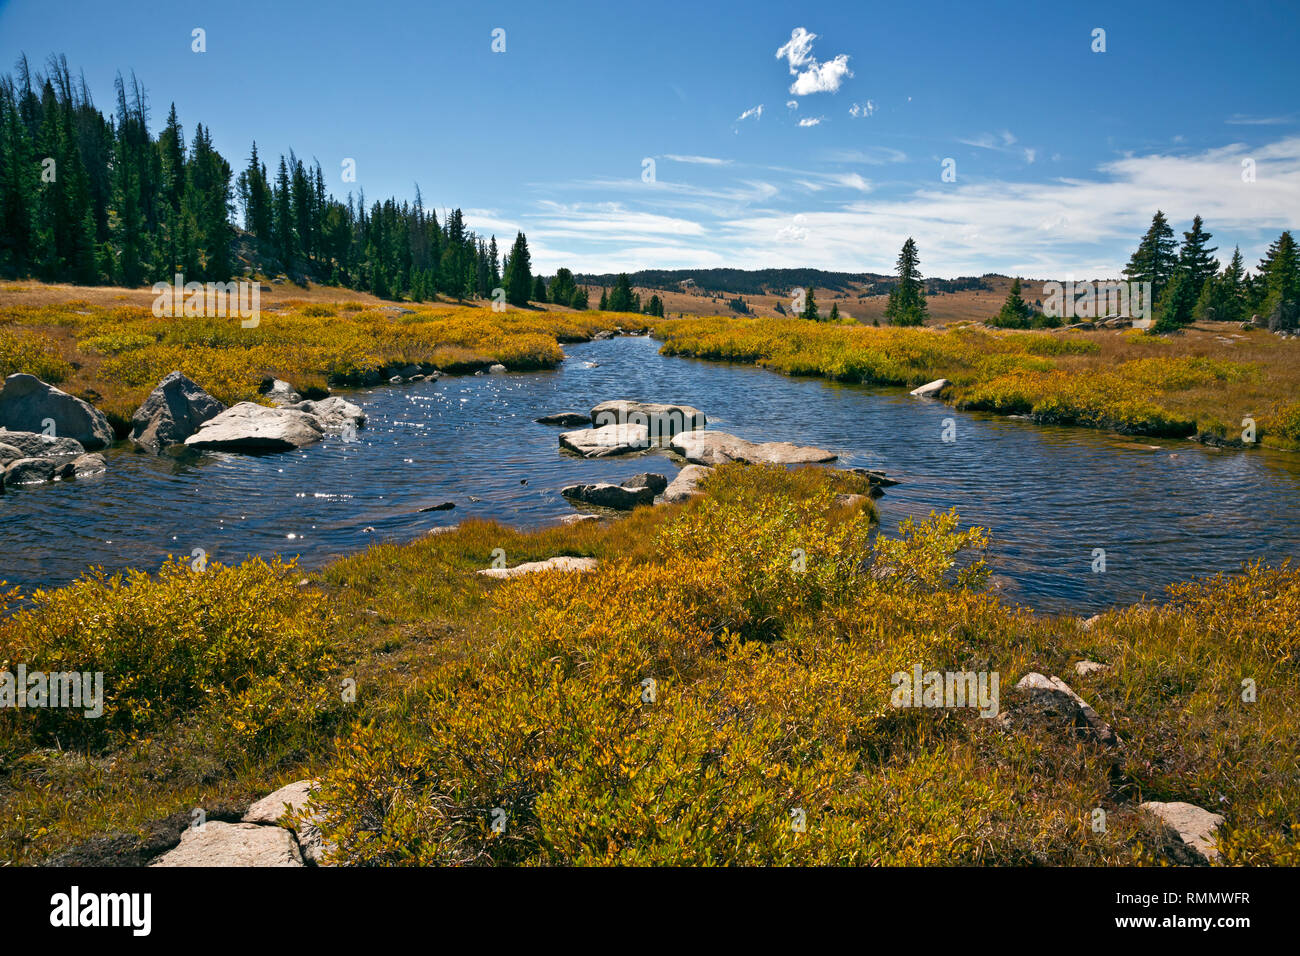 WY03737-00...WYOMING - Fall color along a creek in the Chain Lakes area near the Beartooth Highway in the Shoshone National Forest. Stock Photo